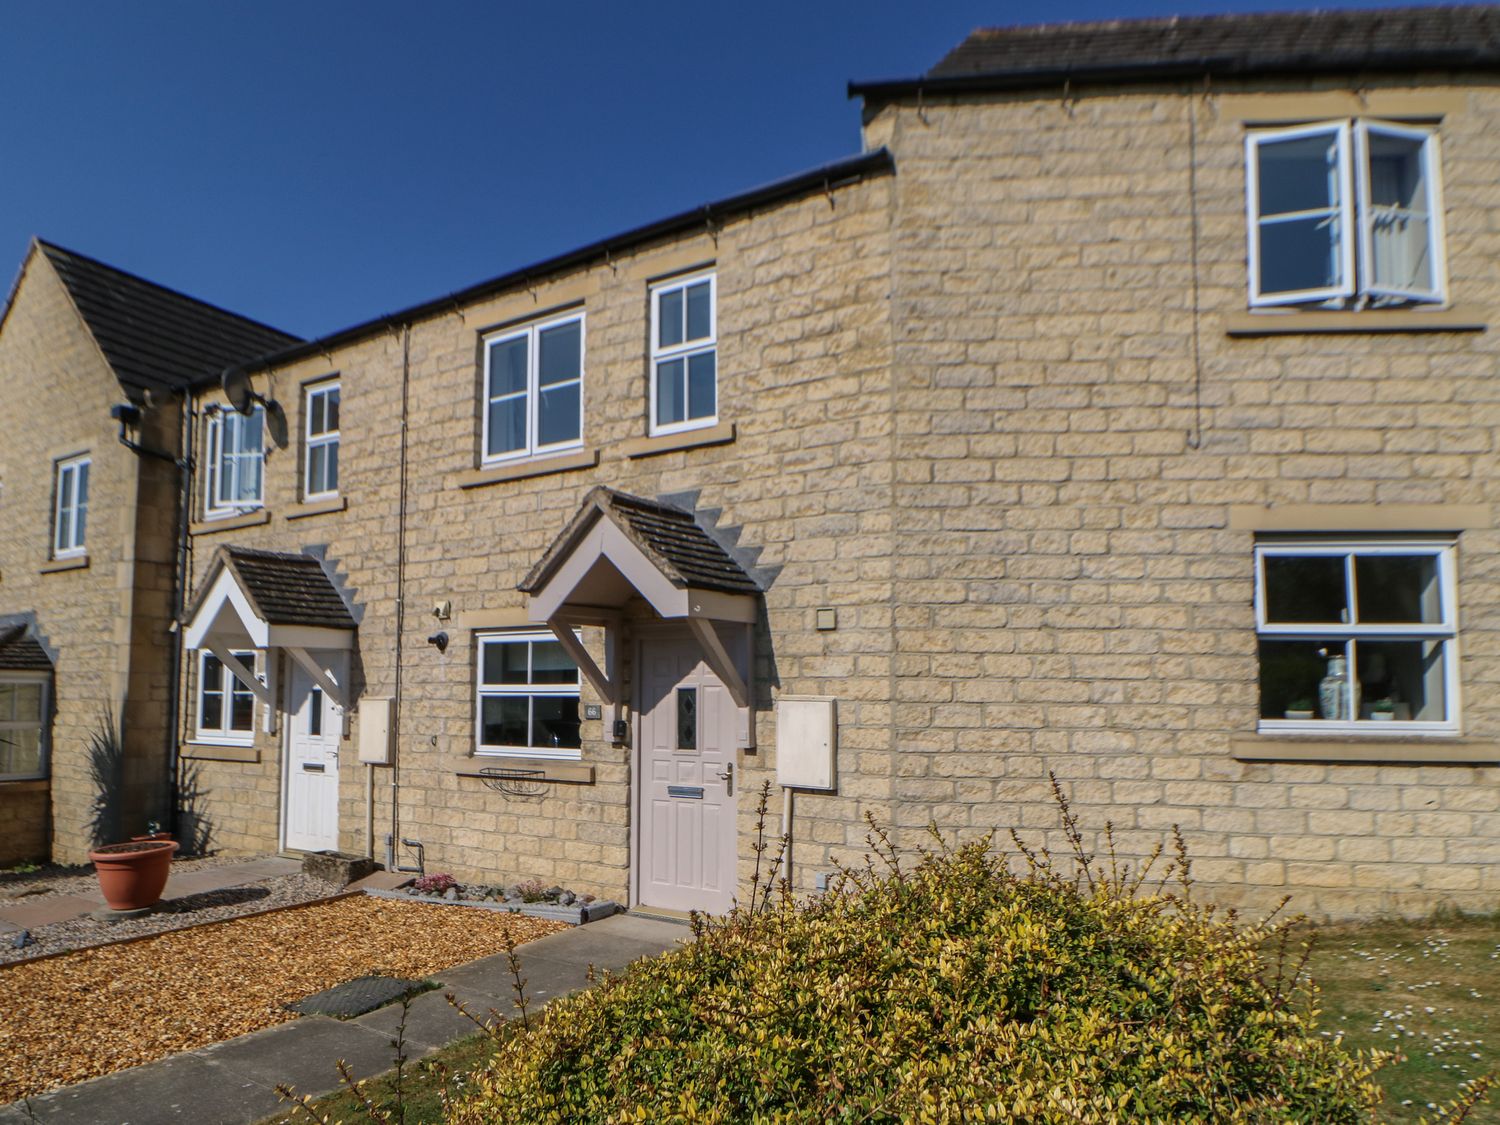 66 Dale Grove - Yorkshire Dales - 1123727 - photo 1